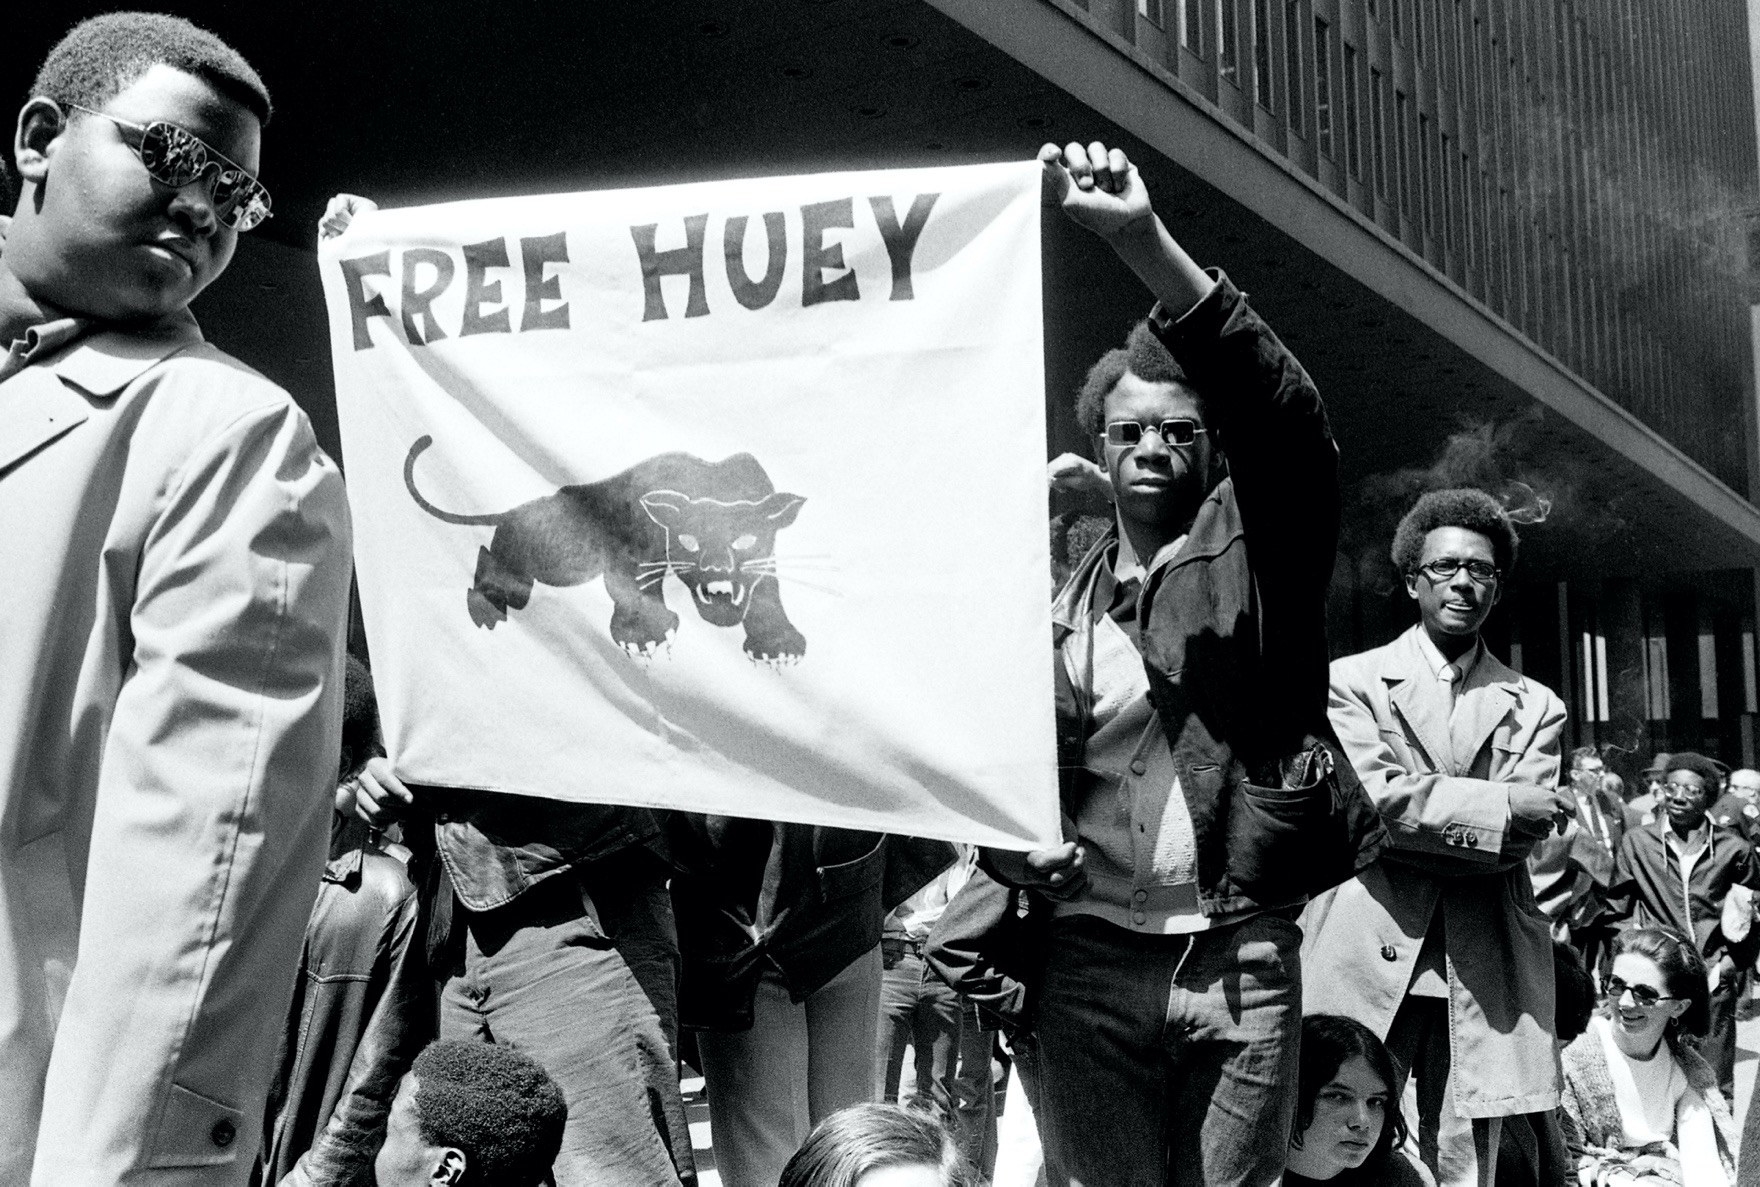 A march with men and children with a man holding up a sign that says free huey with a black panther on it